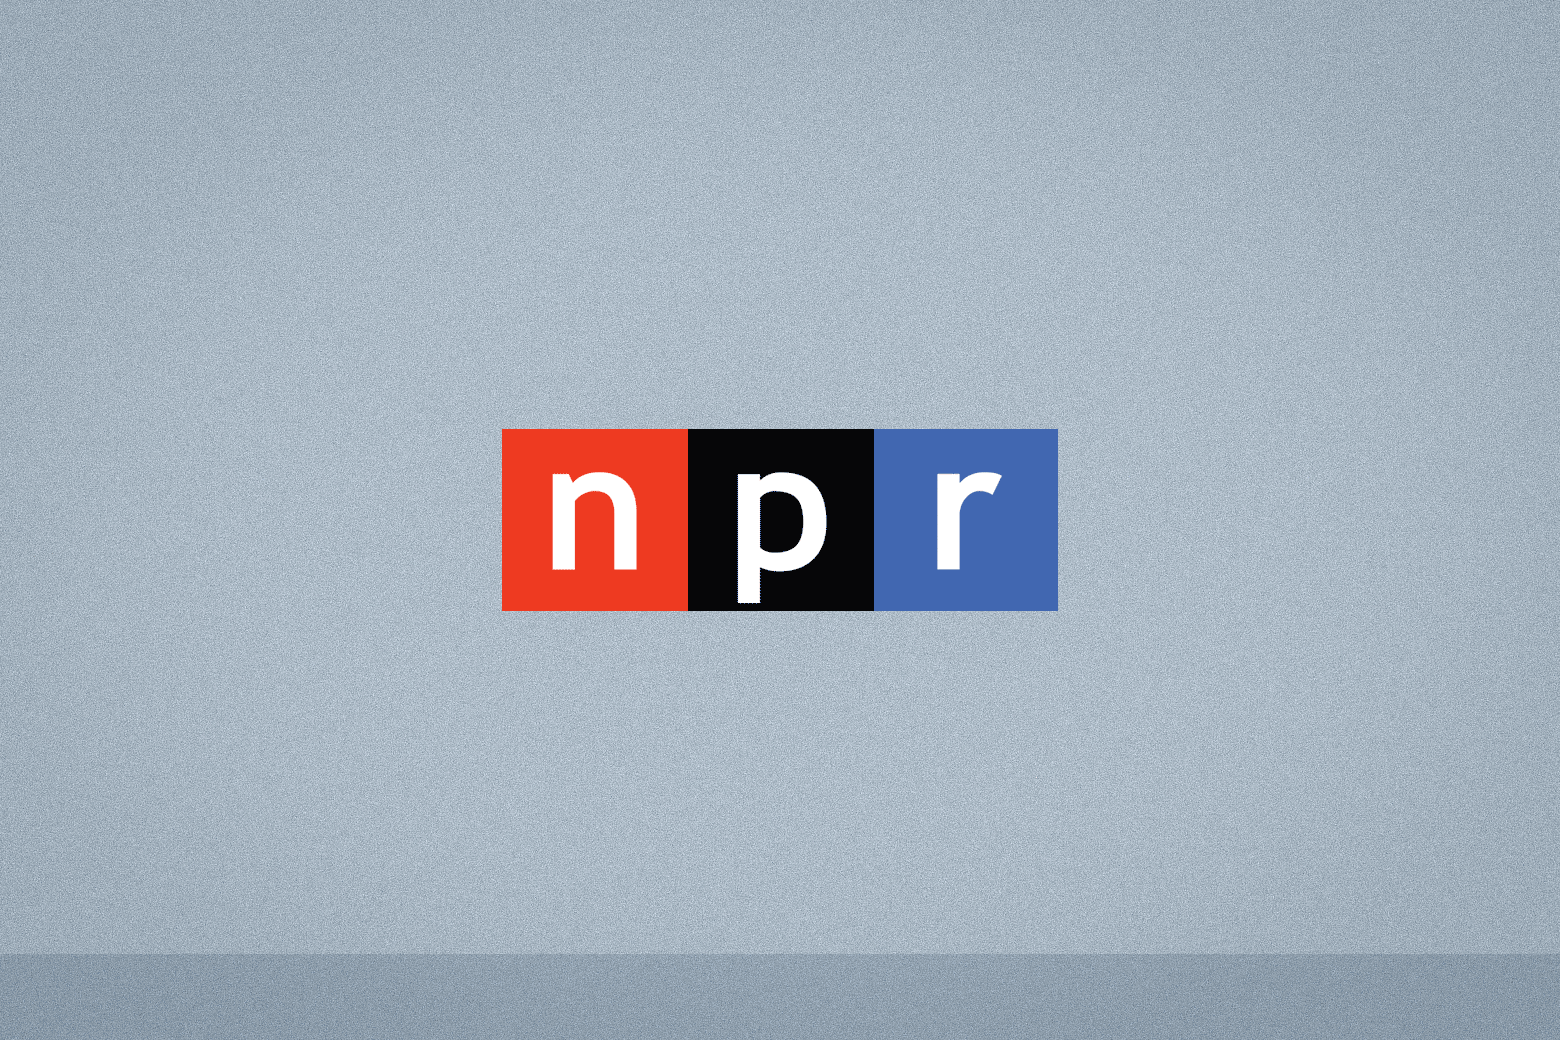 NPR Is a Mess. But “Wokeness” Isn’t the Problem. Alicia Montgomery